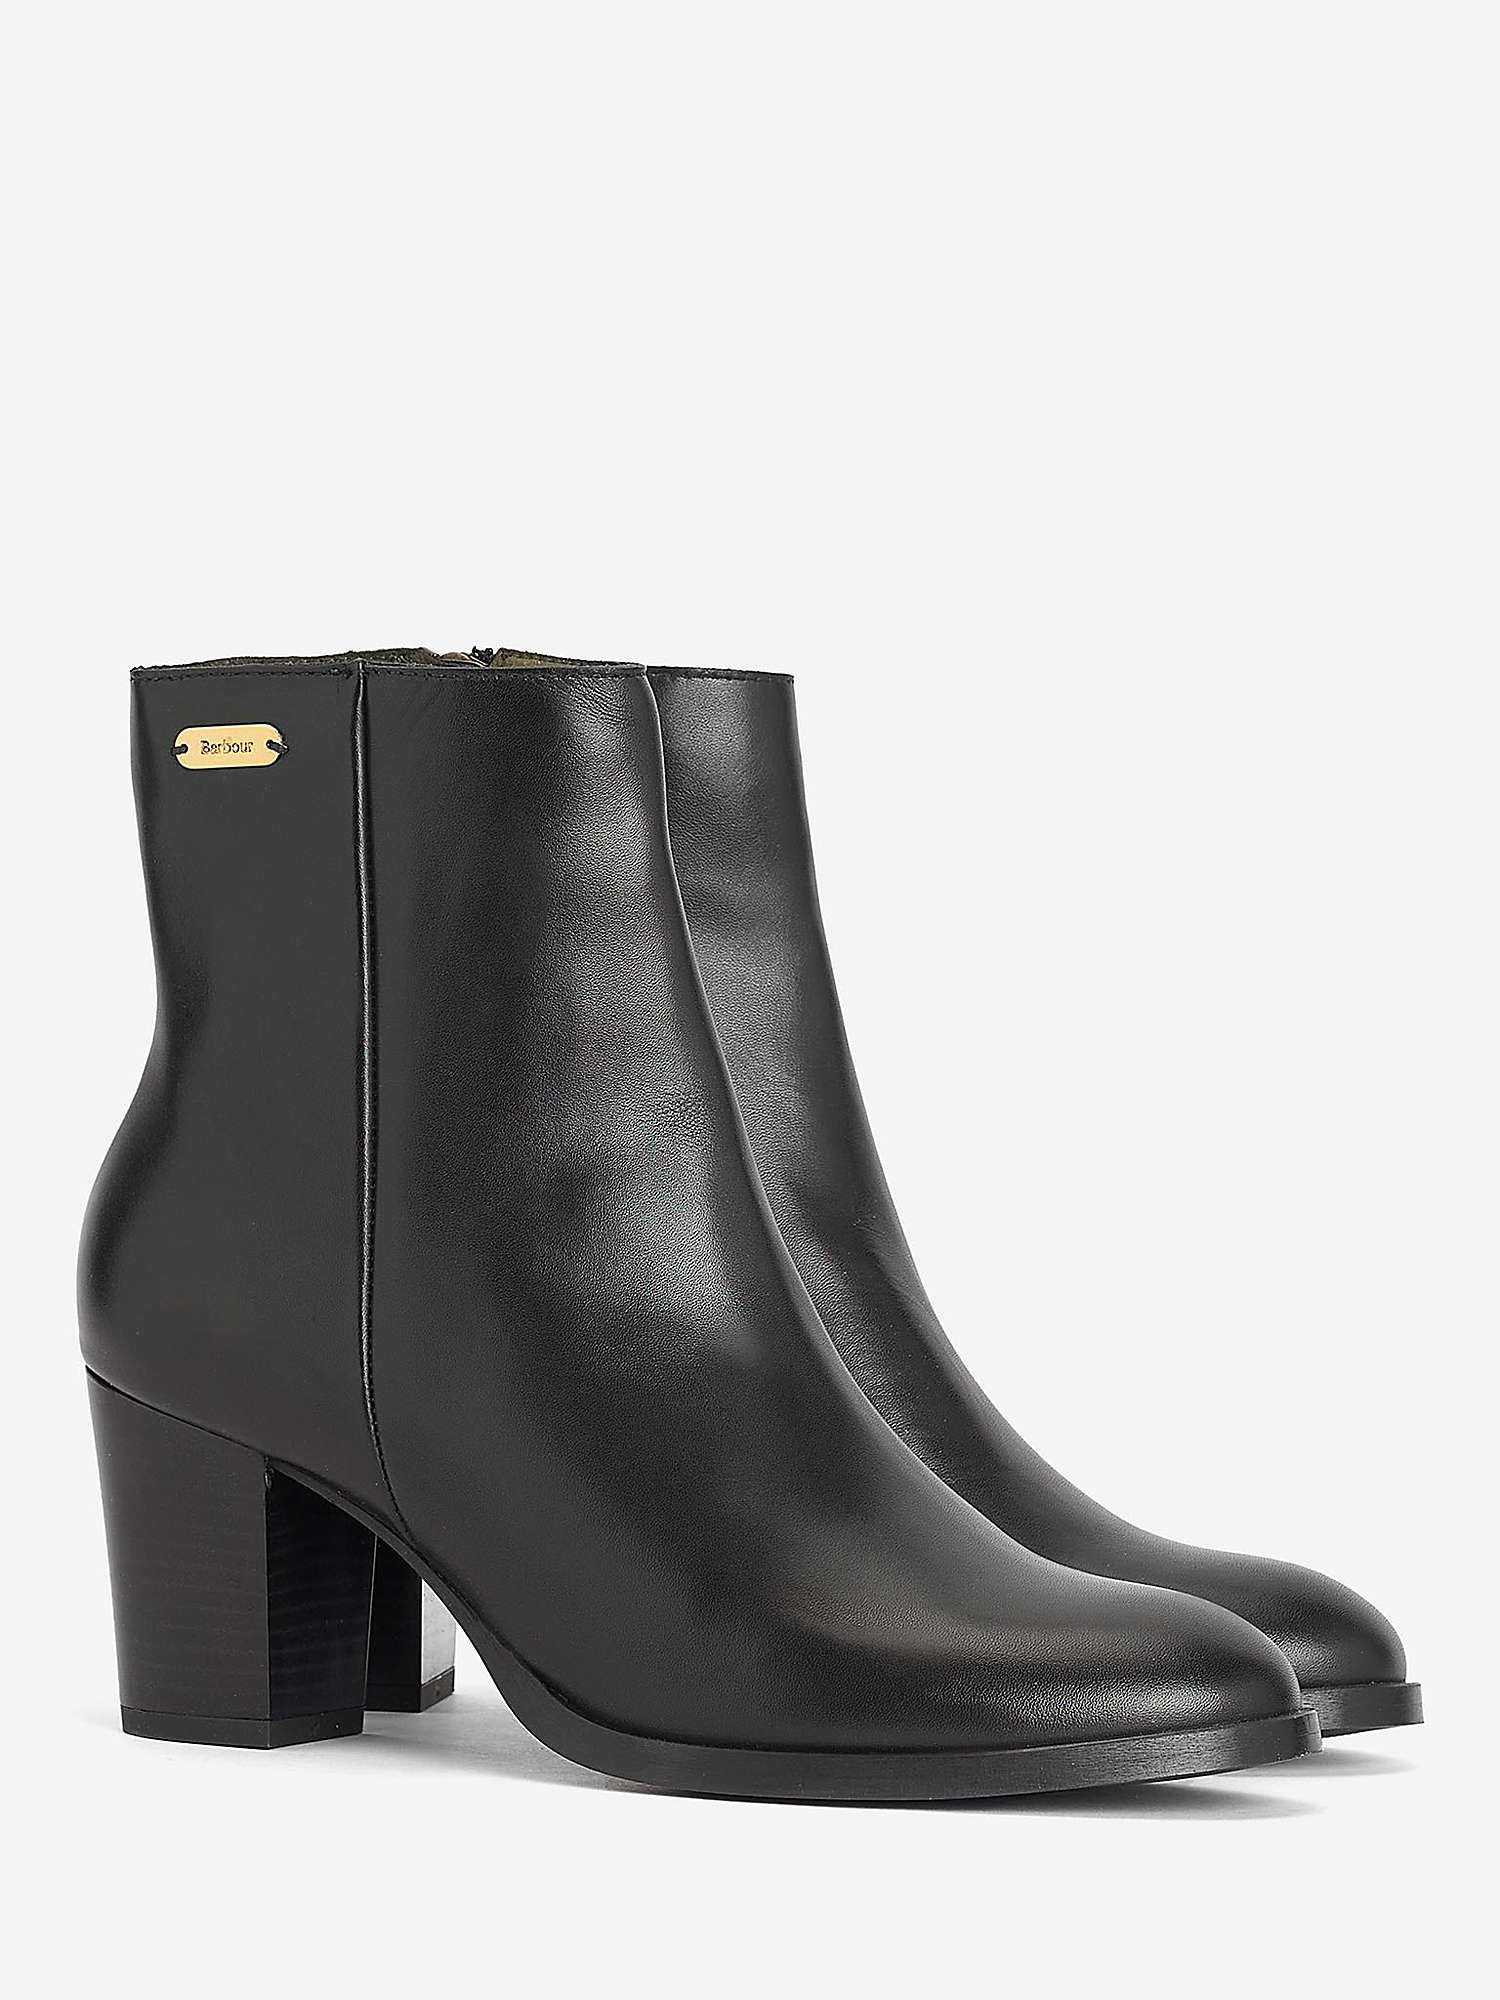 Buy Barbour Amelia Leather Ankle Boots, Black Online at johnlewis.com